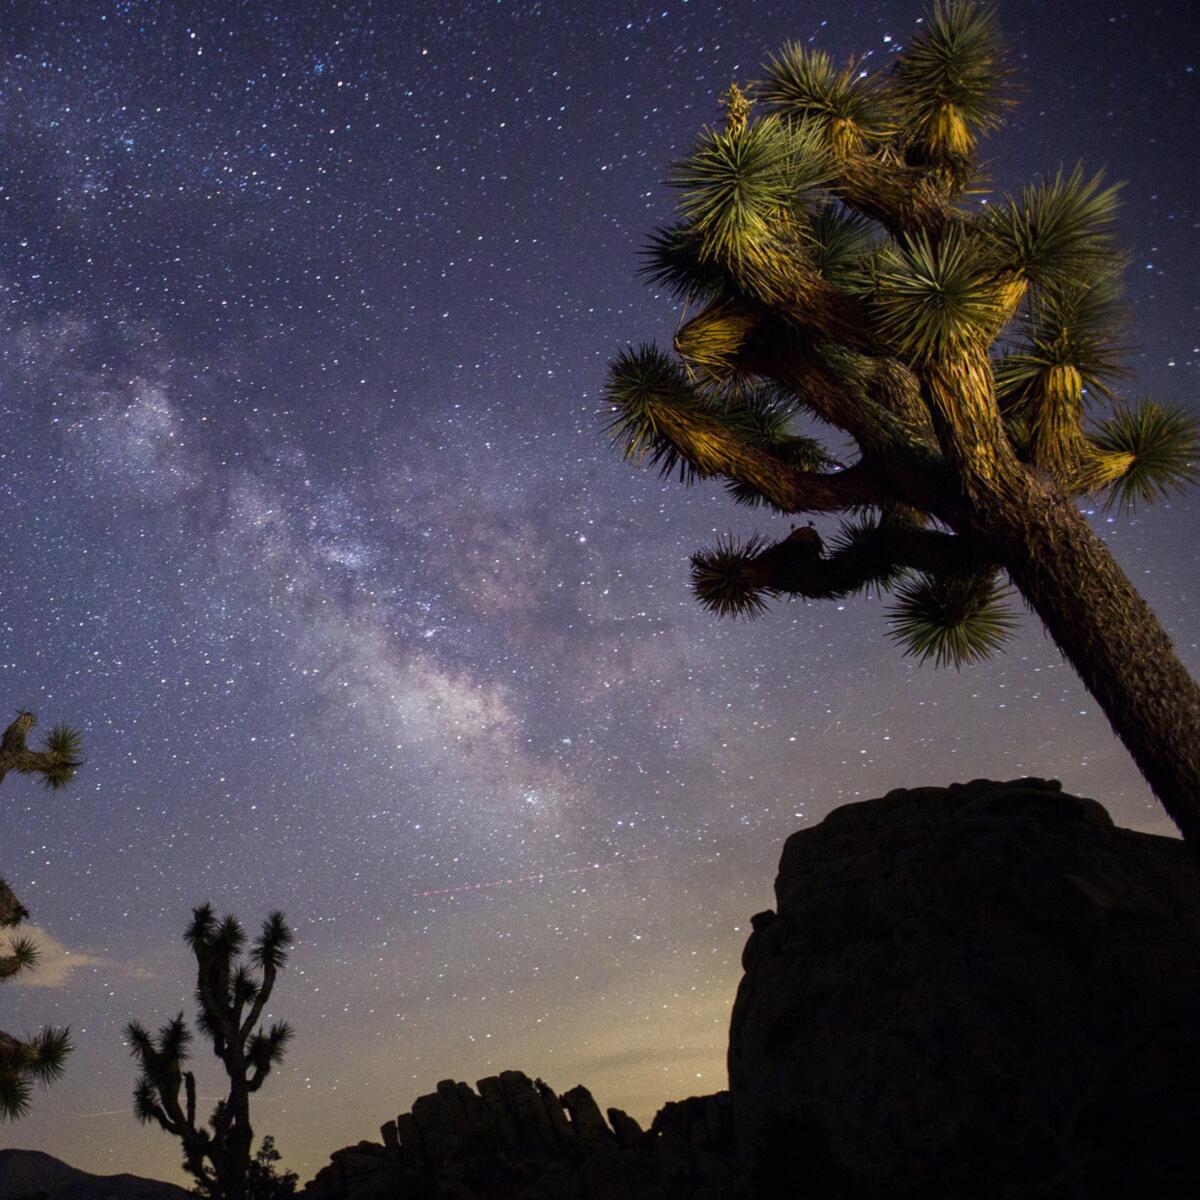 A view of the Milky Way arching over Joshua trees